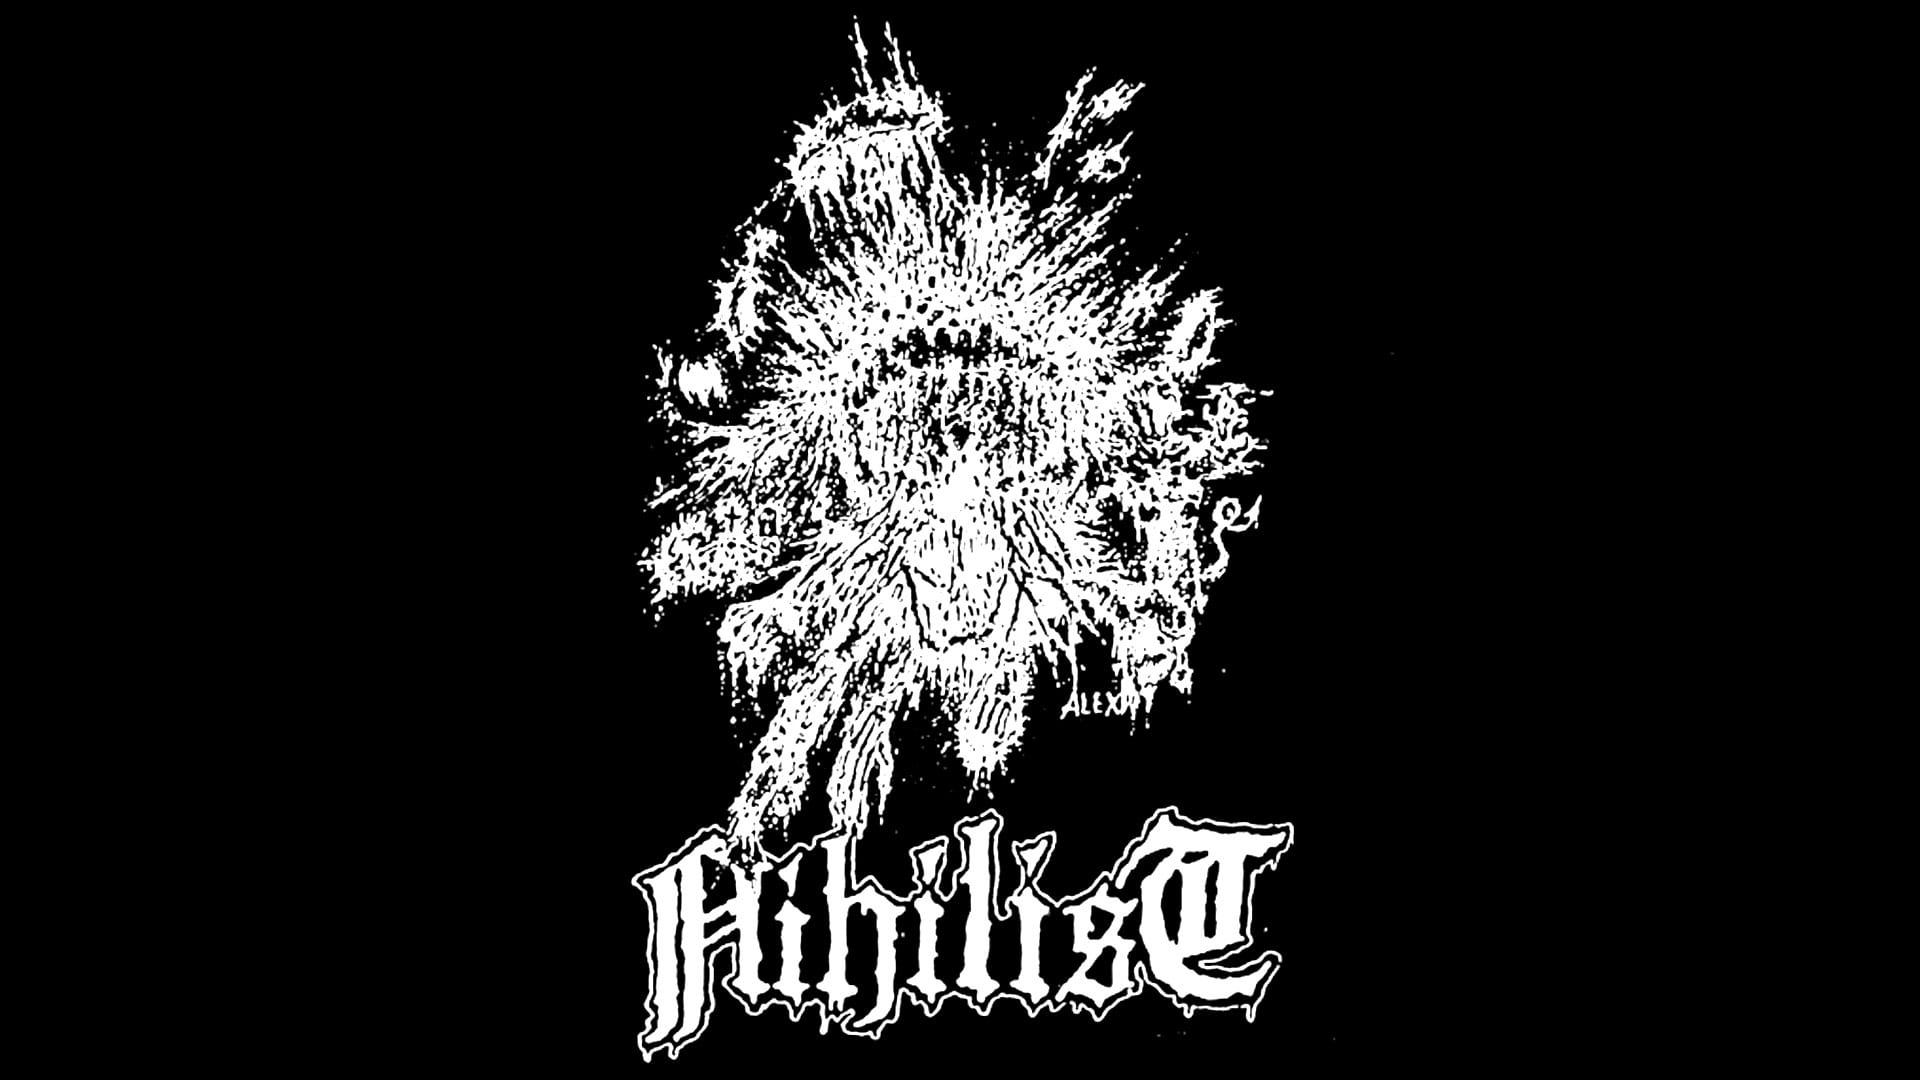 29 Years Ago: NIHILIST complete Only Shreds Remain demo at Sunlight Studio